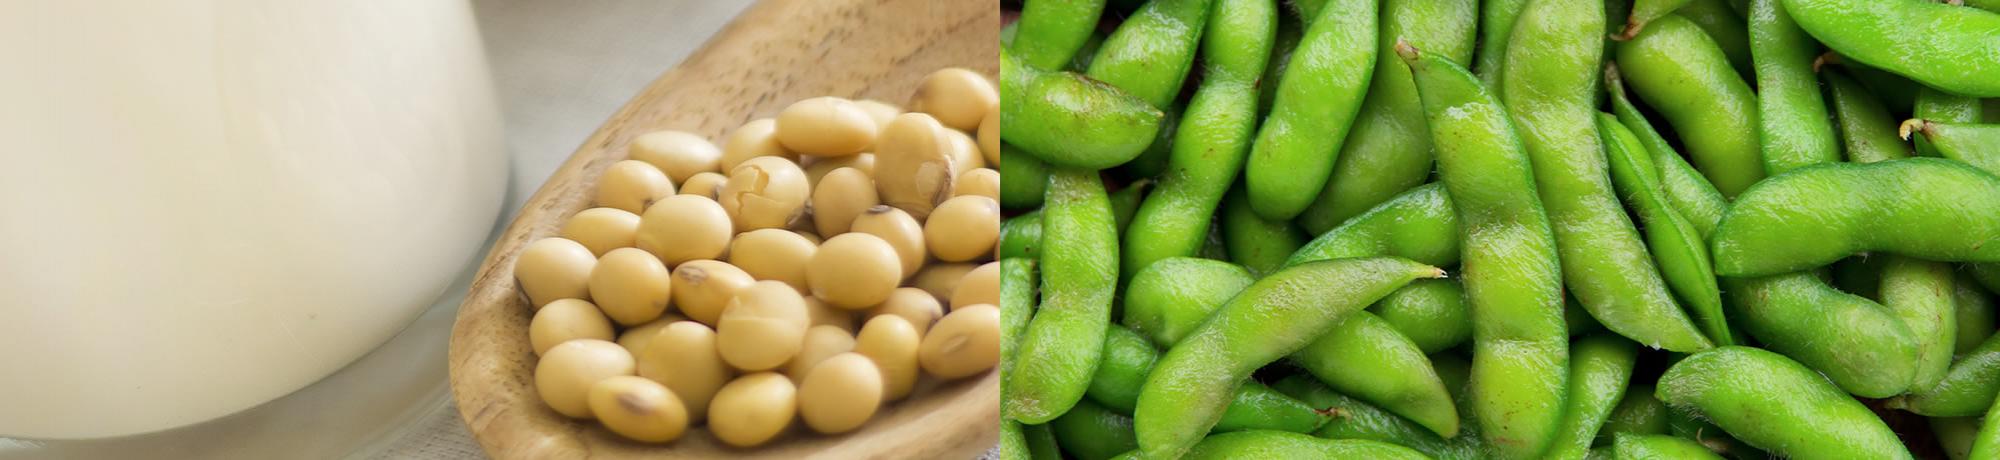 Soy milk and soy beans (edamame)